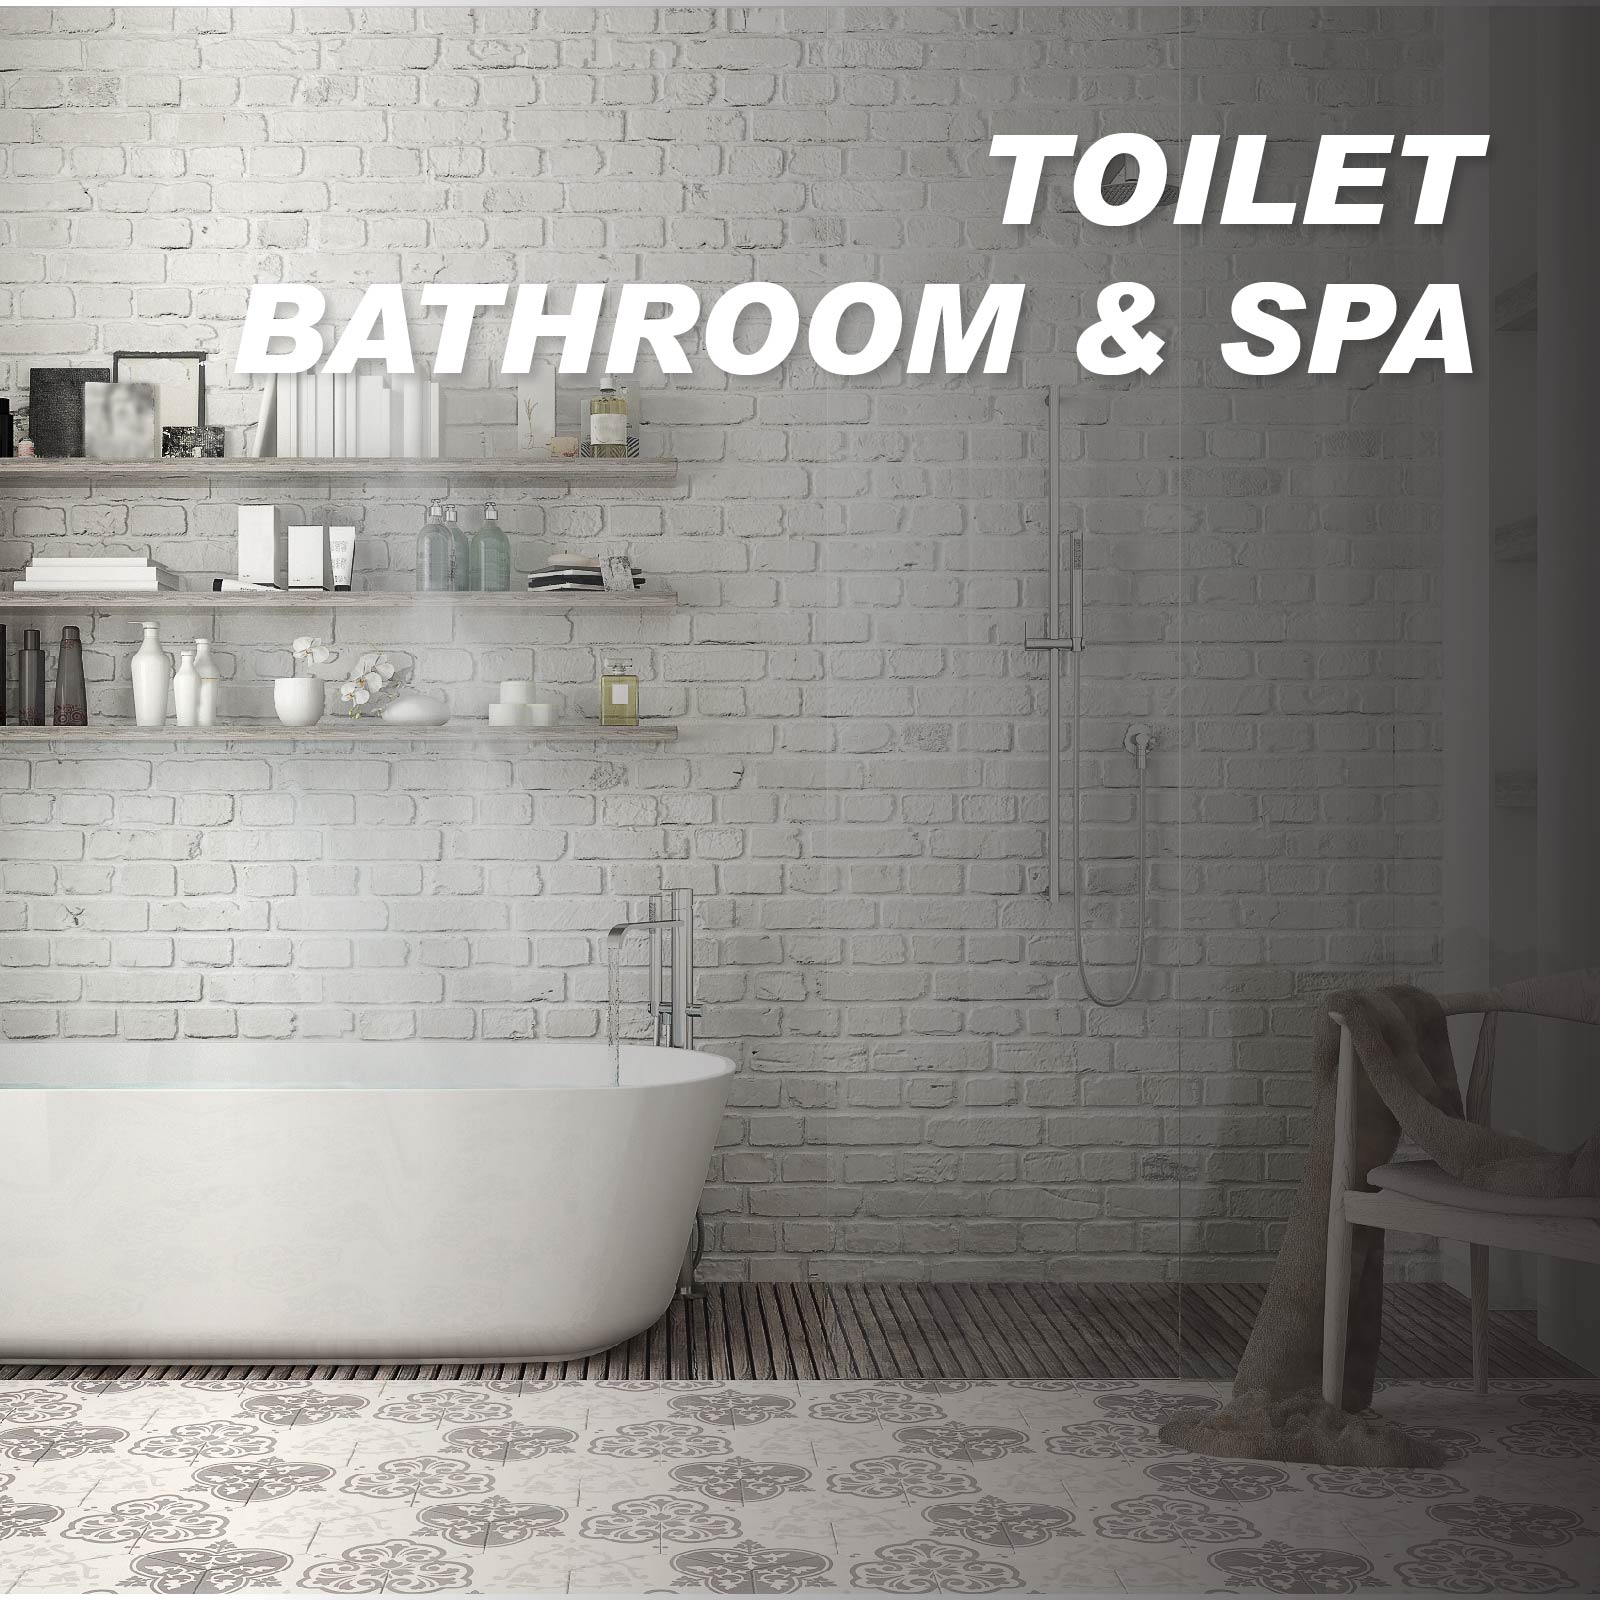 Toilets, Bathrooms & Spa Cleaners